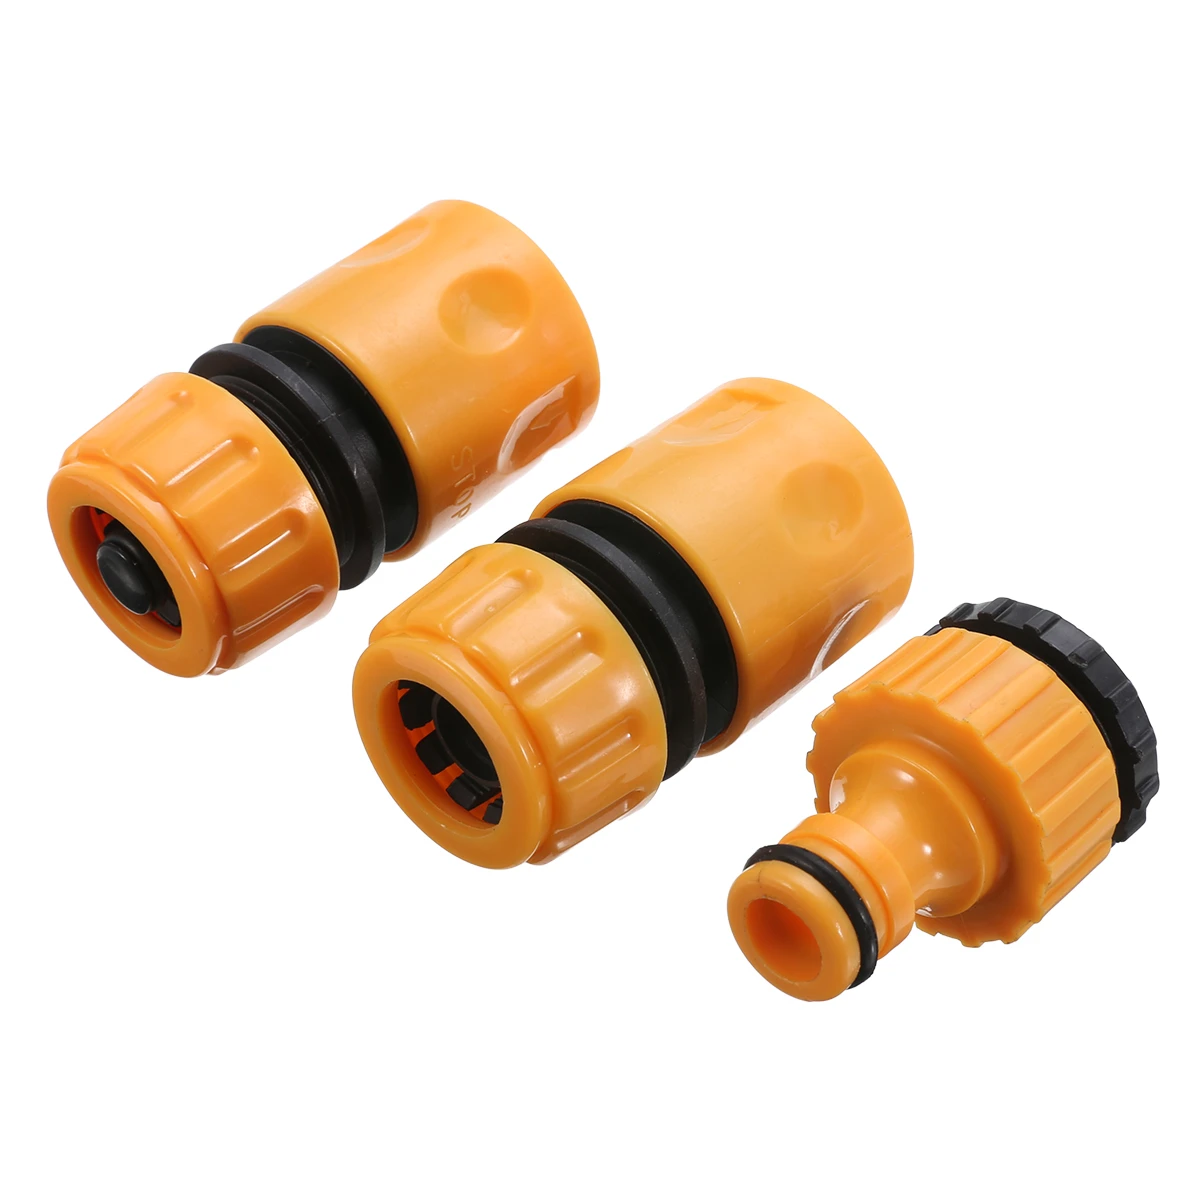 Tools Irrigation Fast Hose Connector 1//2/" 3//4/"barbed Coupling Adapter Drip Tape